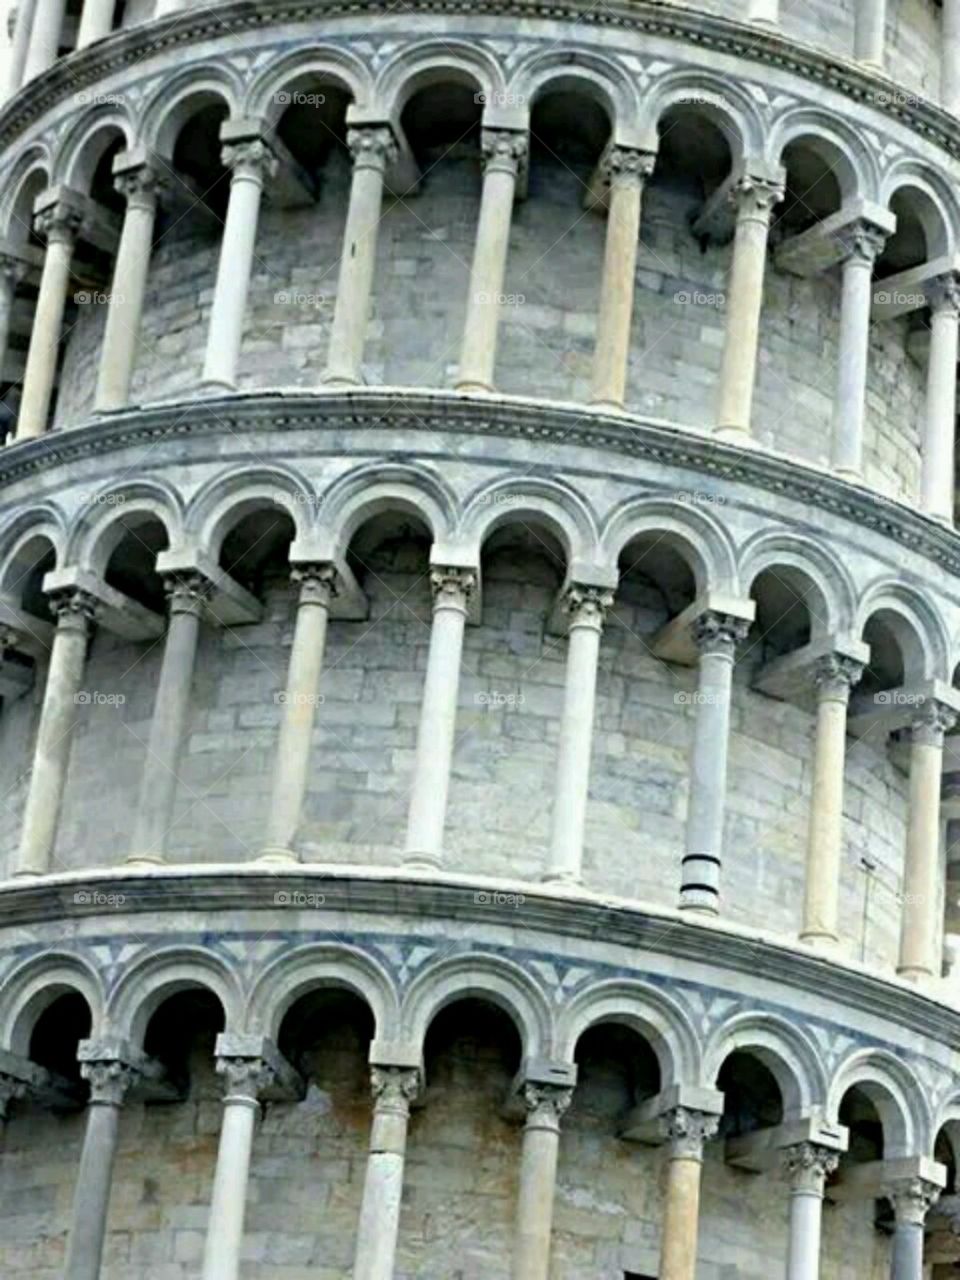 Details of The Tower of Pisa. What I love about this photo is the variation in dwtail. From a distance the Tower looks uniform. Up close the variation